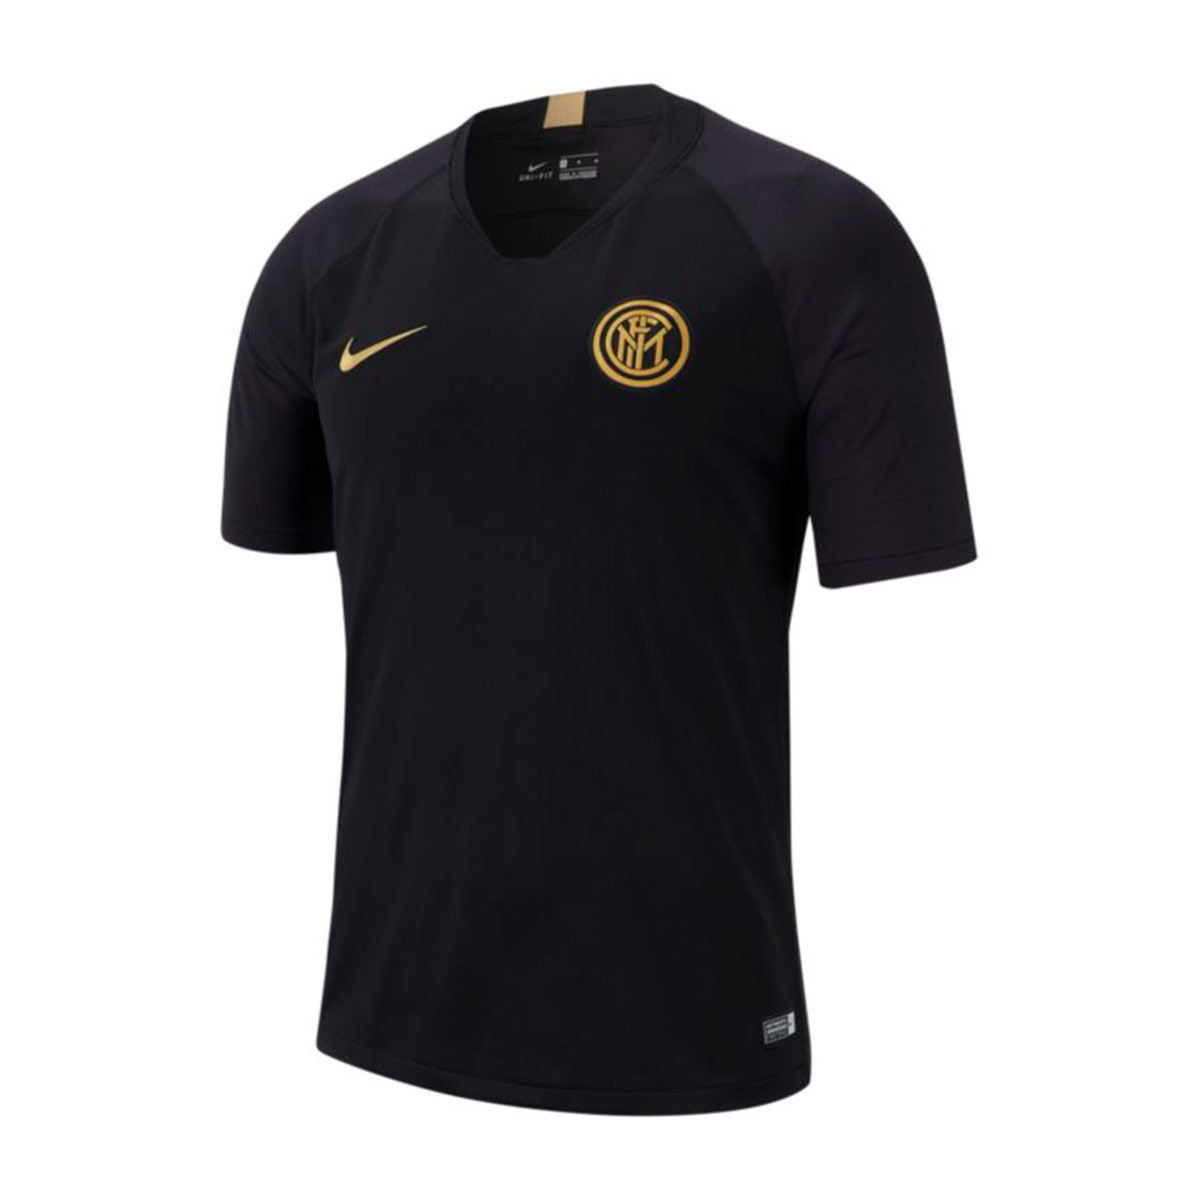 black and gold football jersey